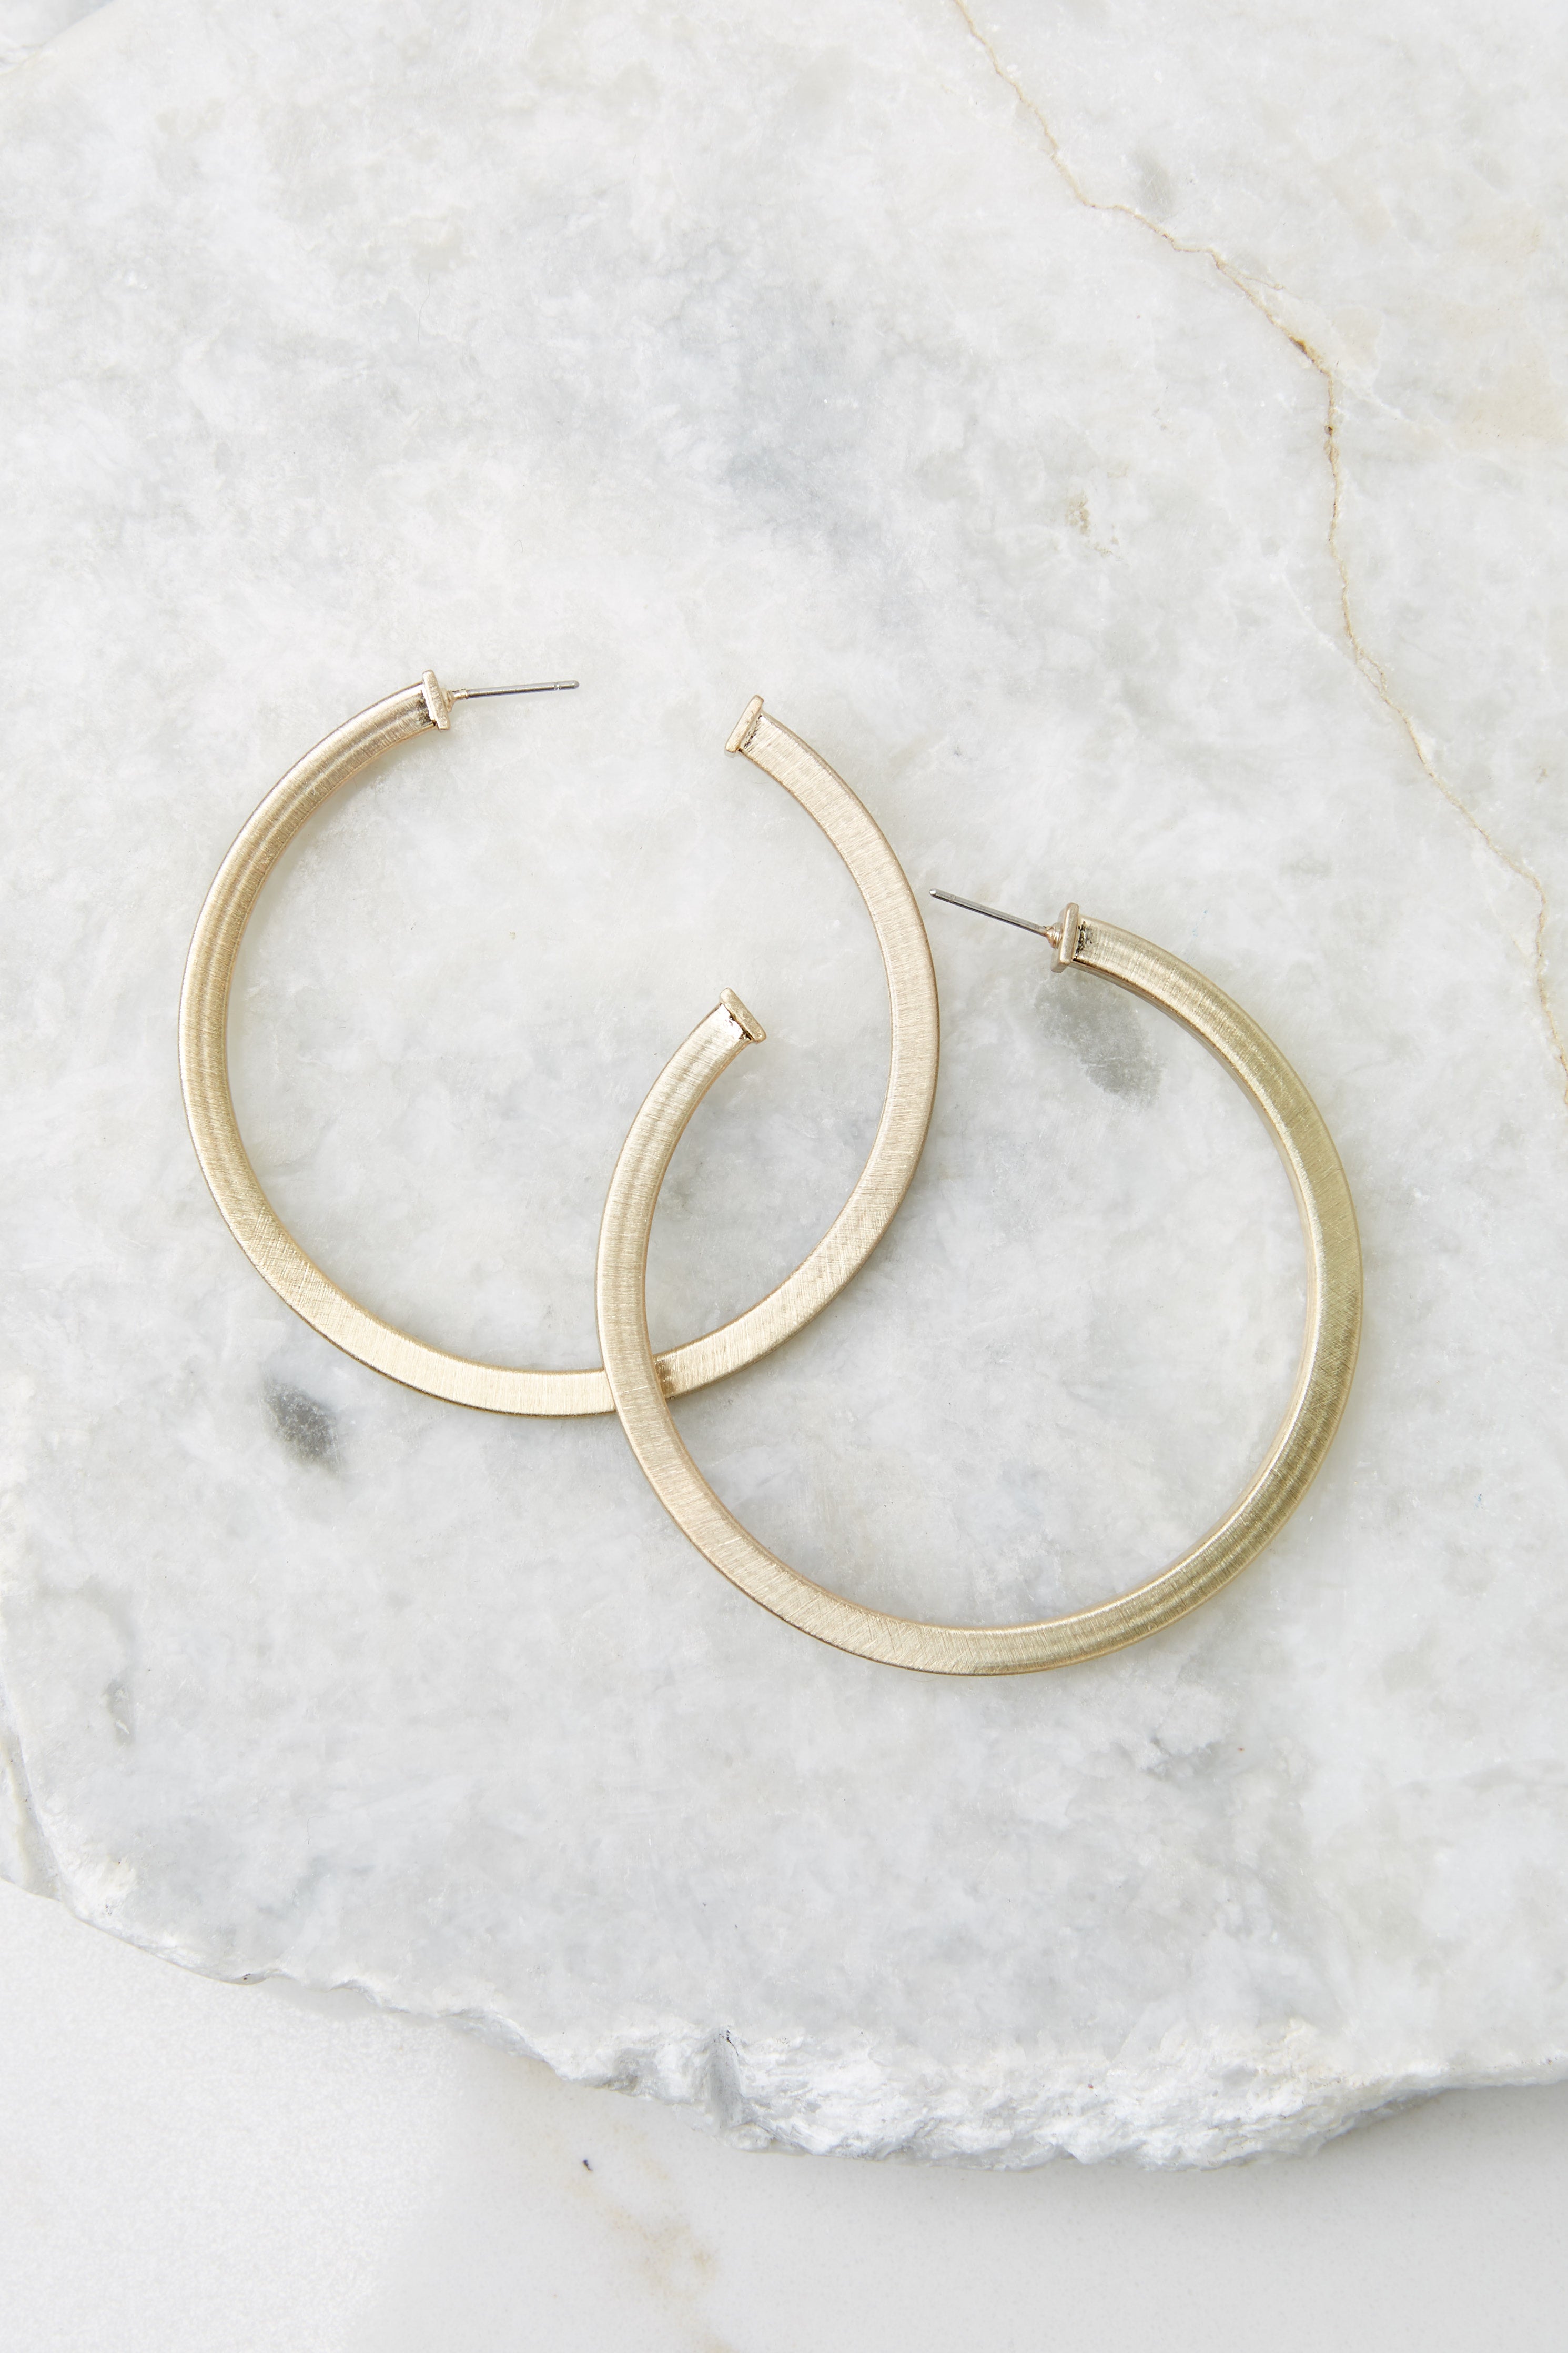 These gold earrings feature a hoop design, box body, and a post secure backing. 